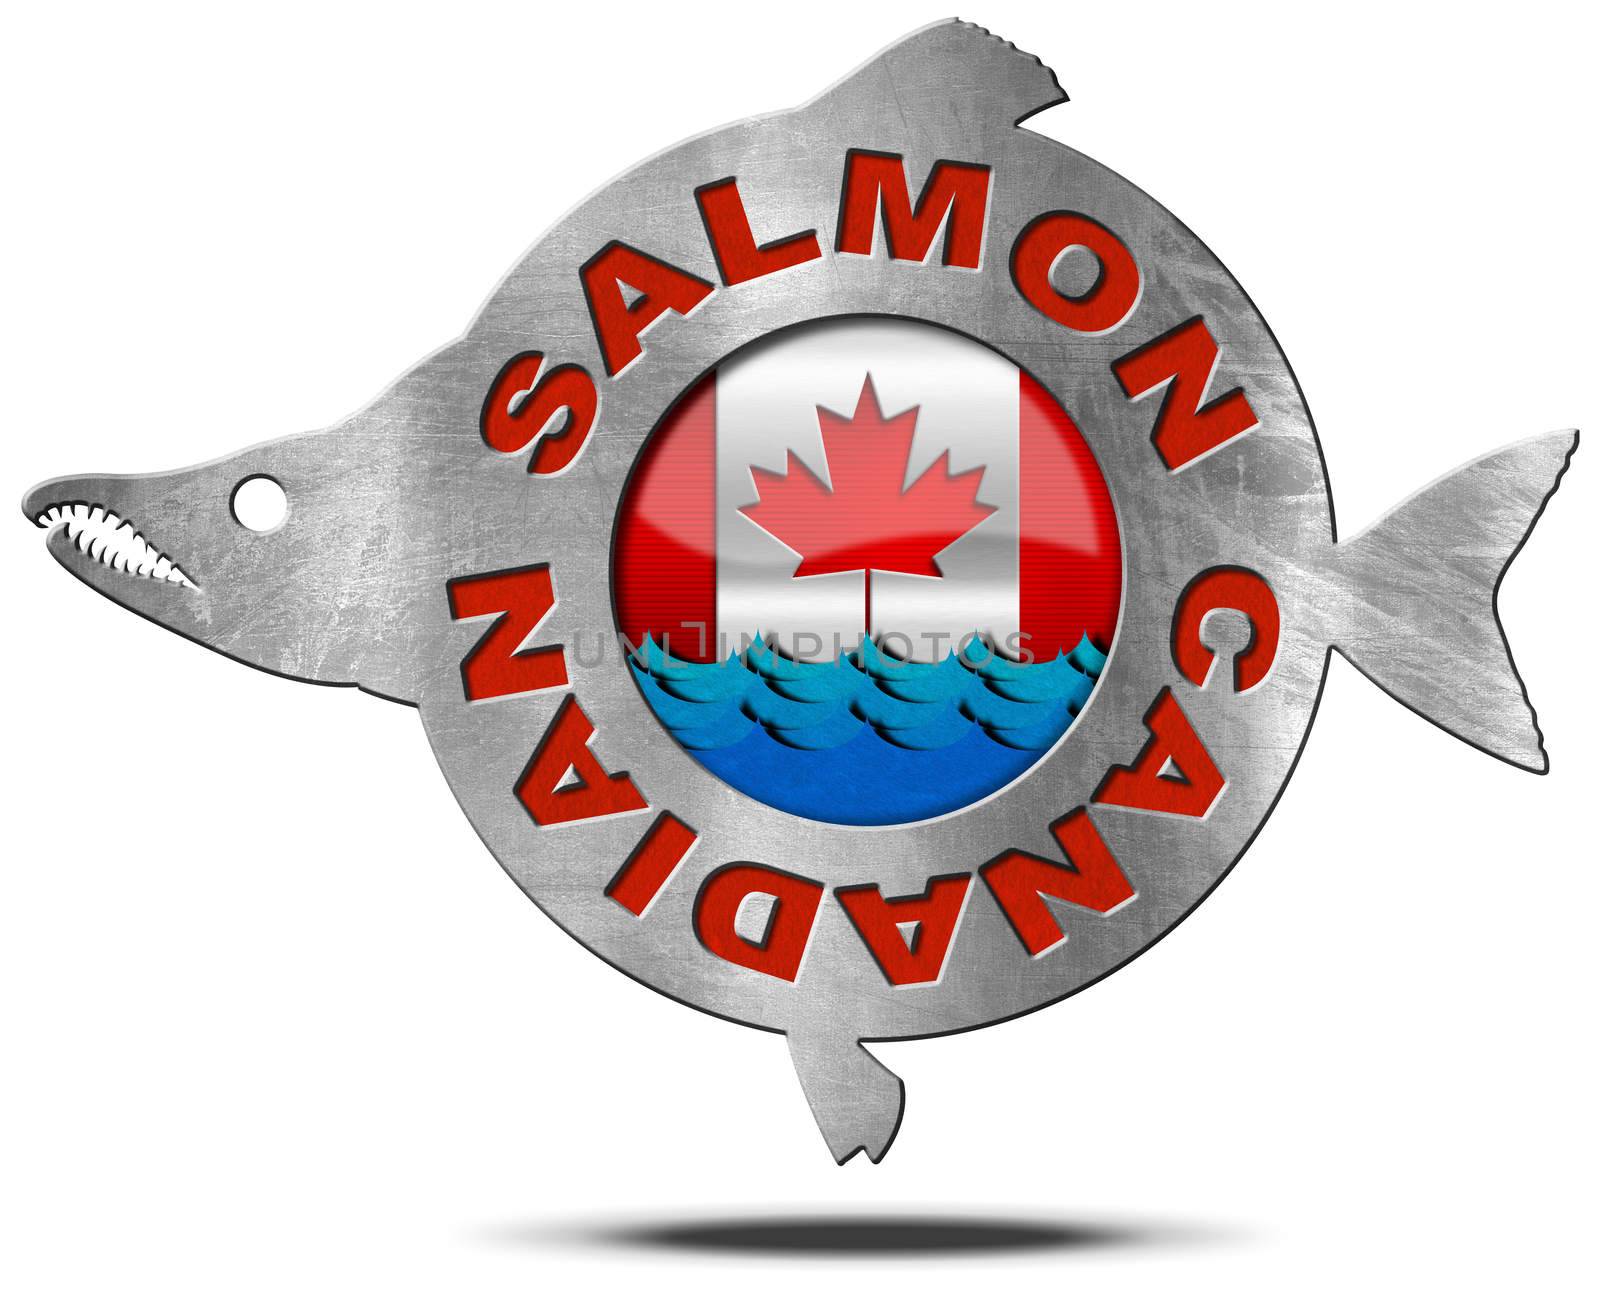 Metallic icon or symbol in the shape of a salmon fish with text Canadian salmon, blue waves and canadian flag. Isolated on a white background